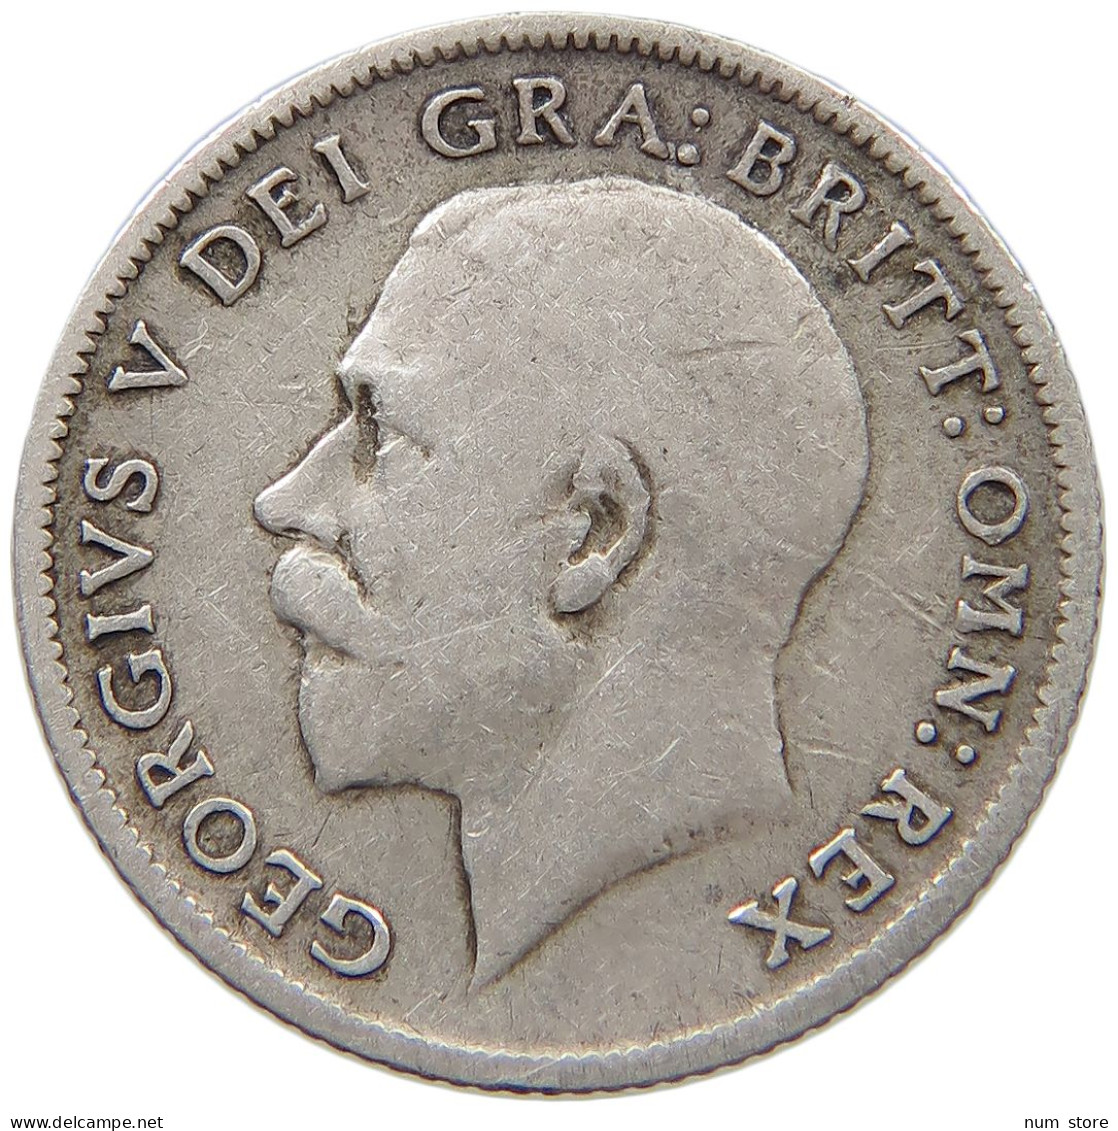 GREAT BRITAIN SIXPENCE 1911 GEORGE V. (1910-1936) #MA 023355 - H. 6 Pence